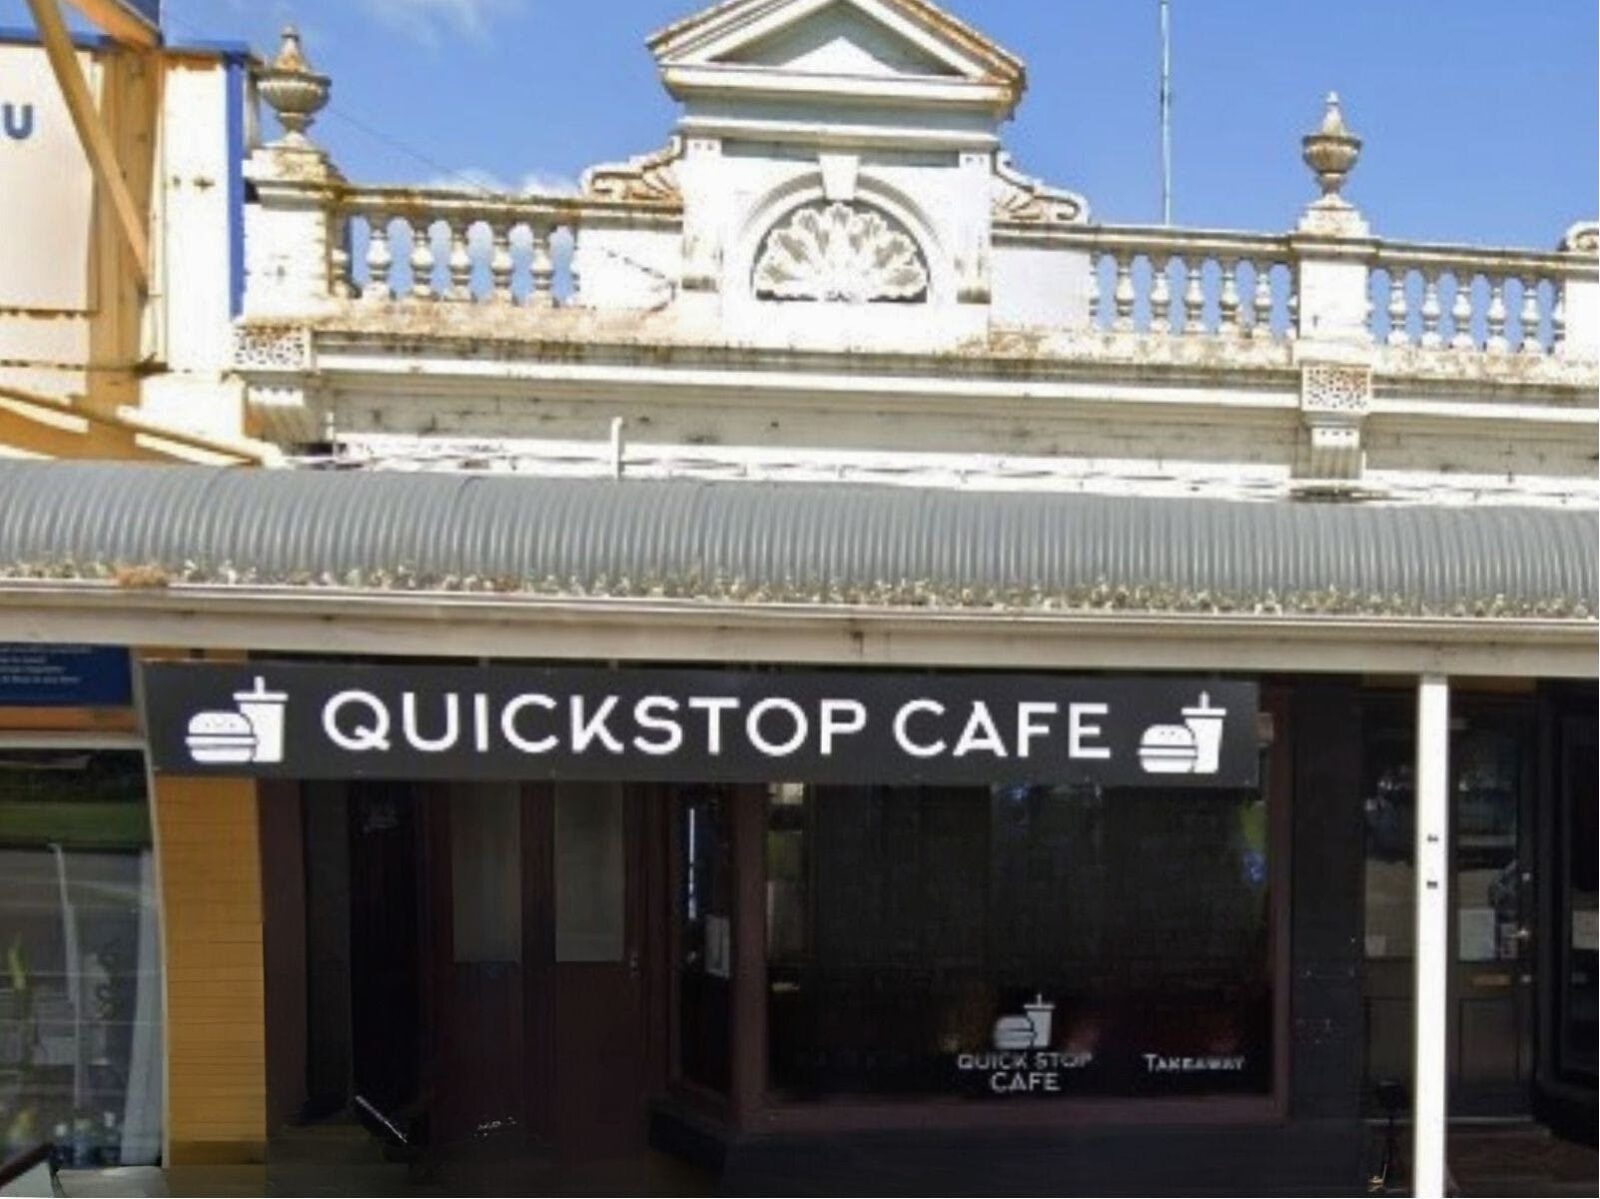 Front of the cafe with a black and white sign and large window